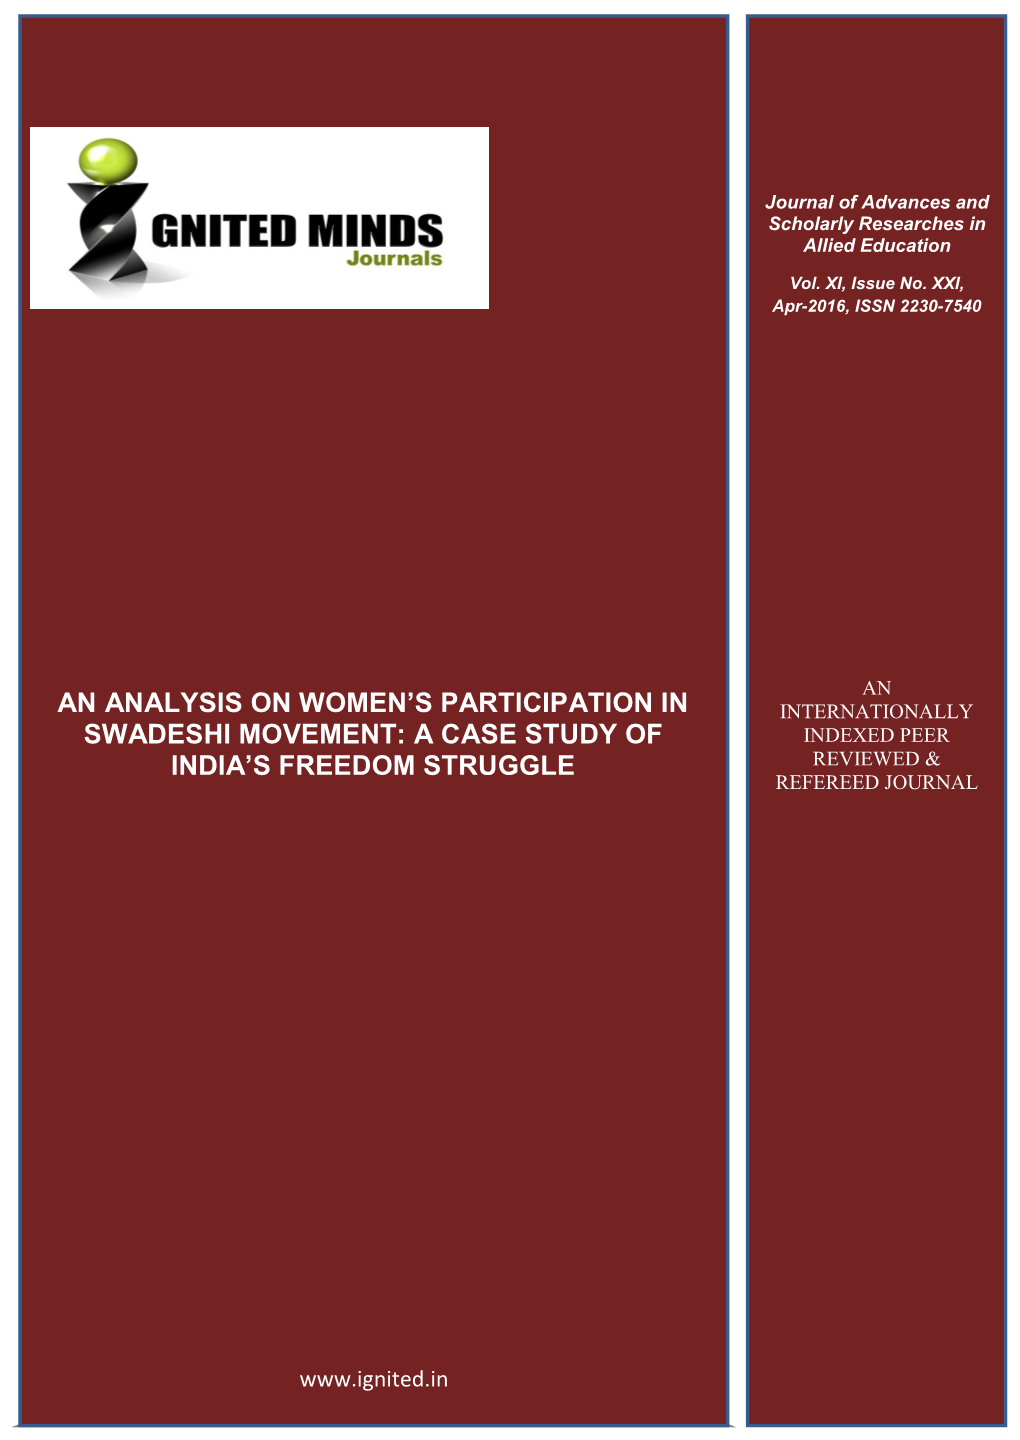 An Analysis on Women's Participation in Swadeshi Movement: a Case Study